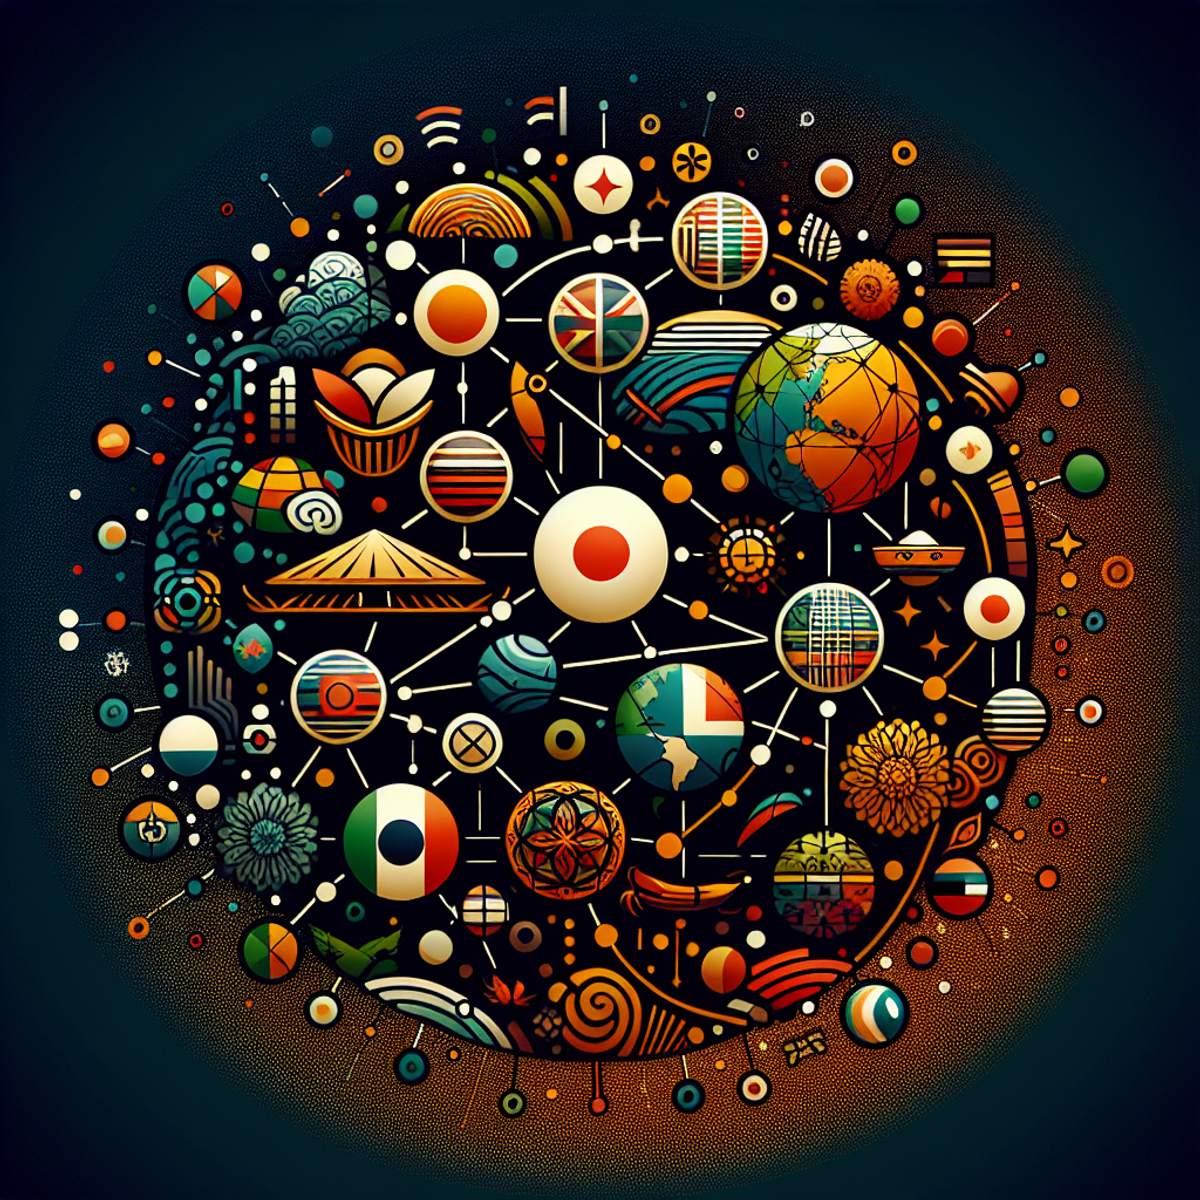 Interconnected spheres representing global communication with cultural symbols for different languages.